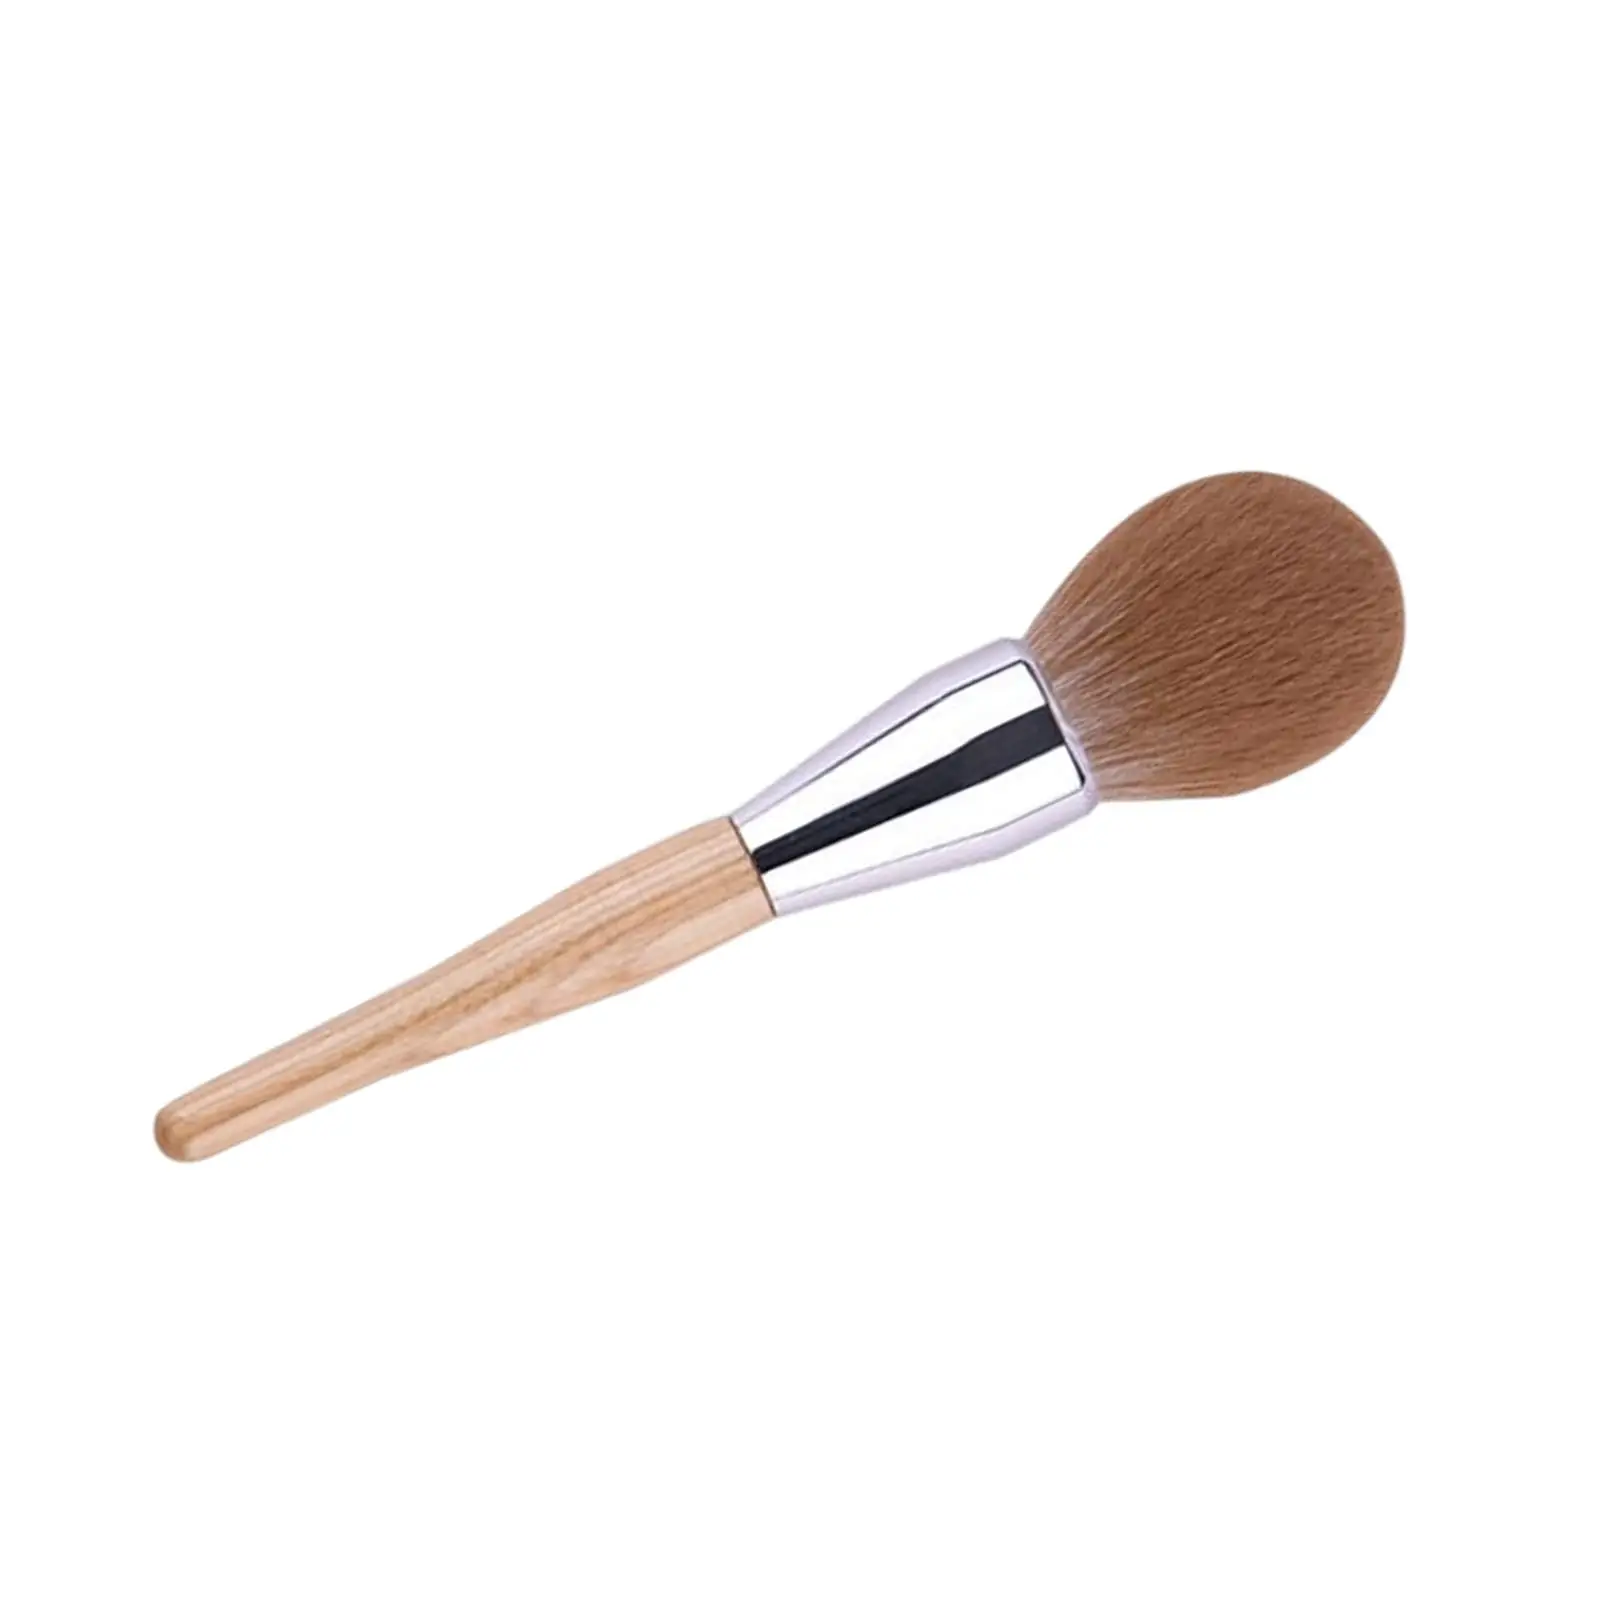  Brush Makeup Tool Compact Portable Face Brush Soft for Setting 